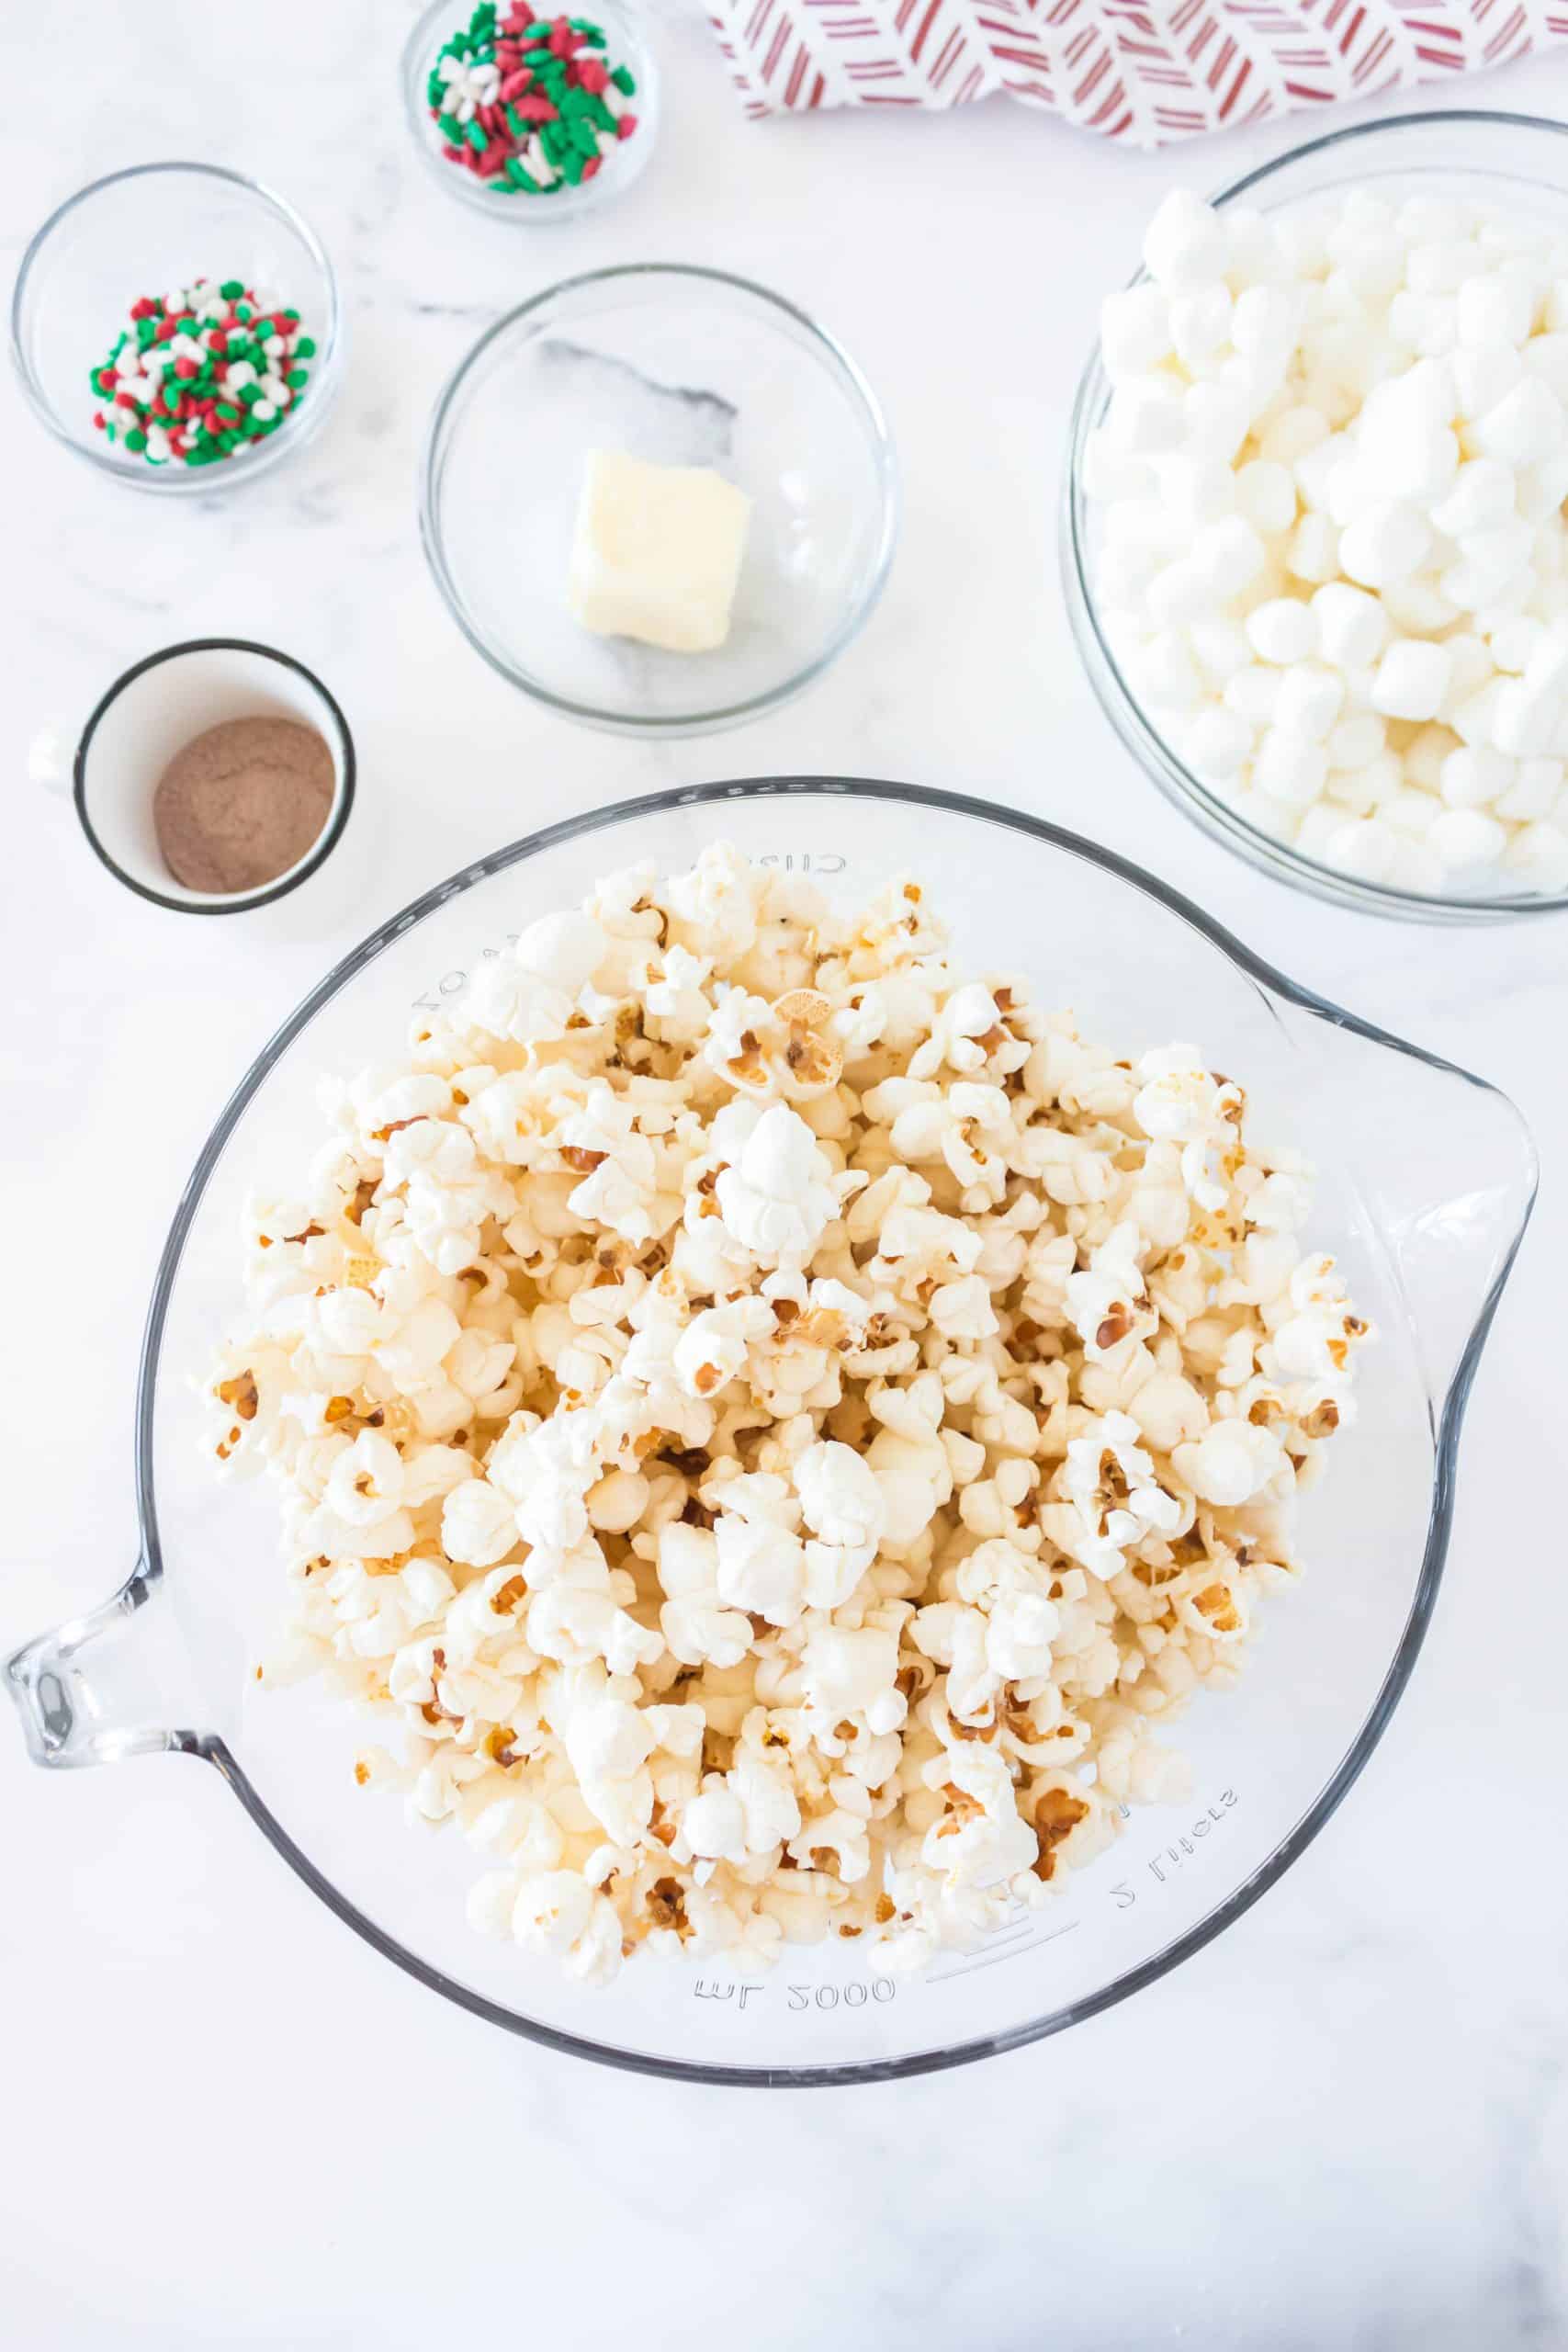 popped popcorn, butter, mini marshmallows, hot cocoa mix powder, Christmas sprinkles.